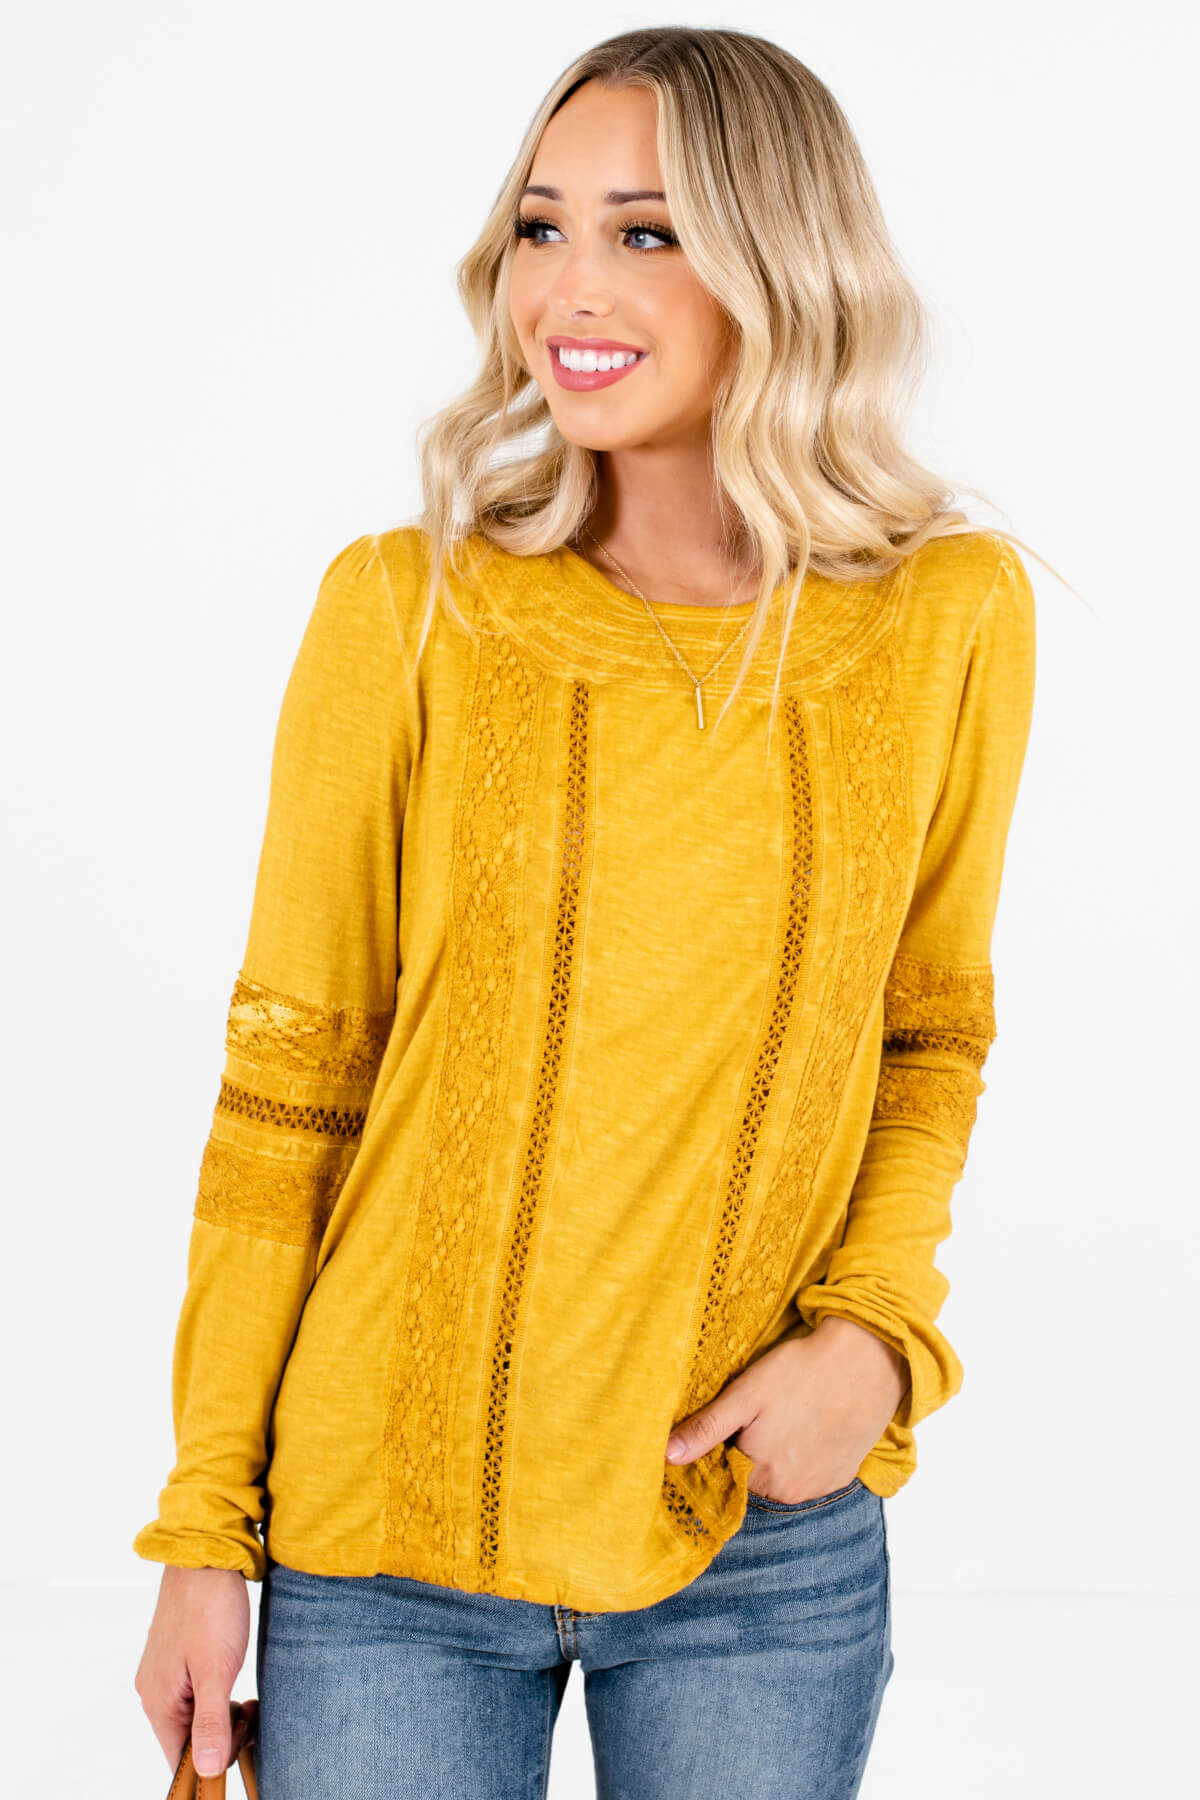 Women’s Mustard Yellow Buttoned Cuff Boutique Tops